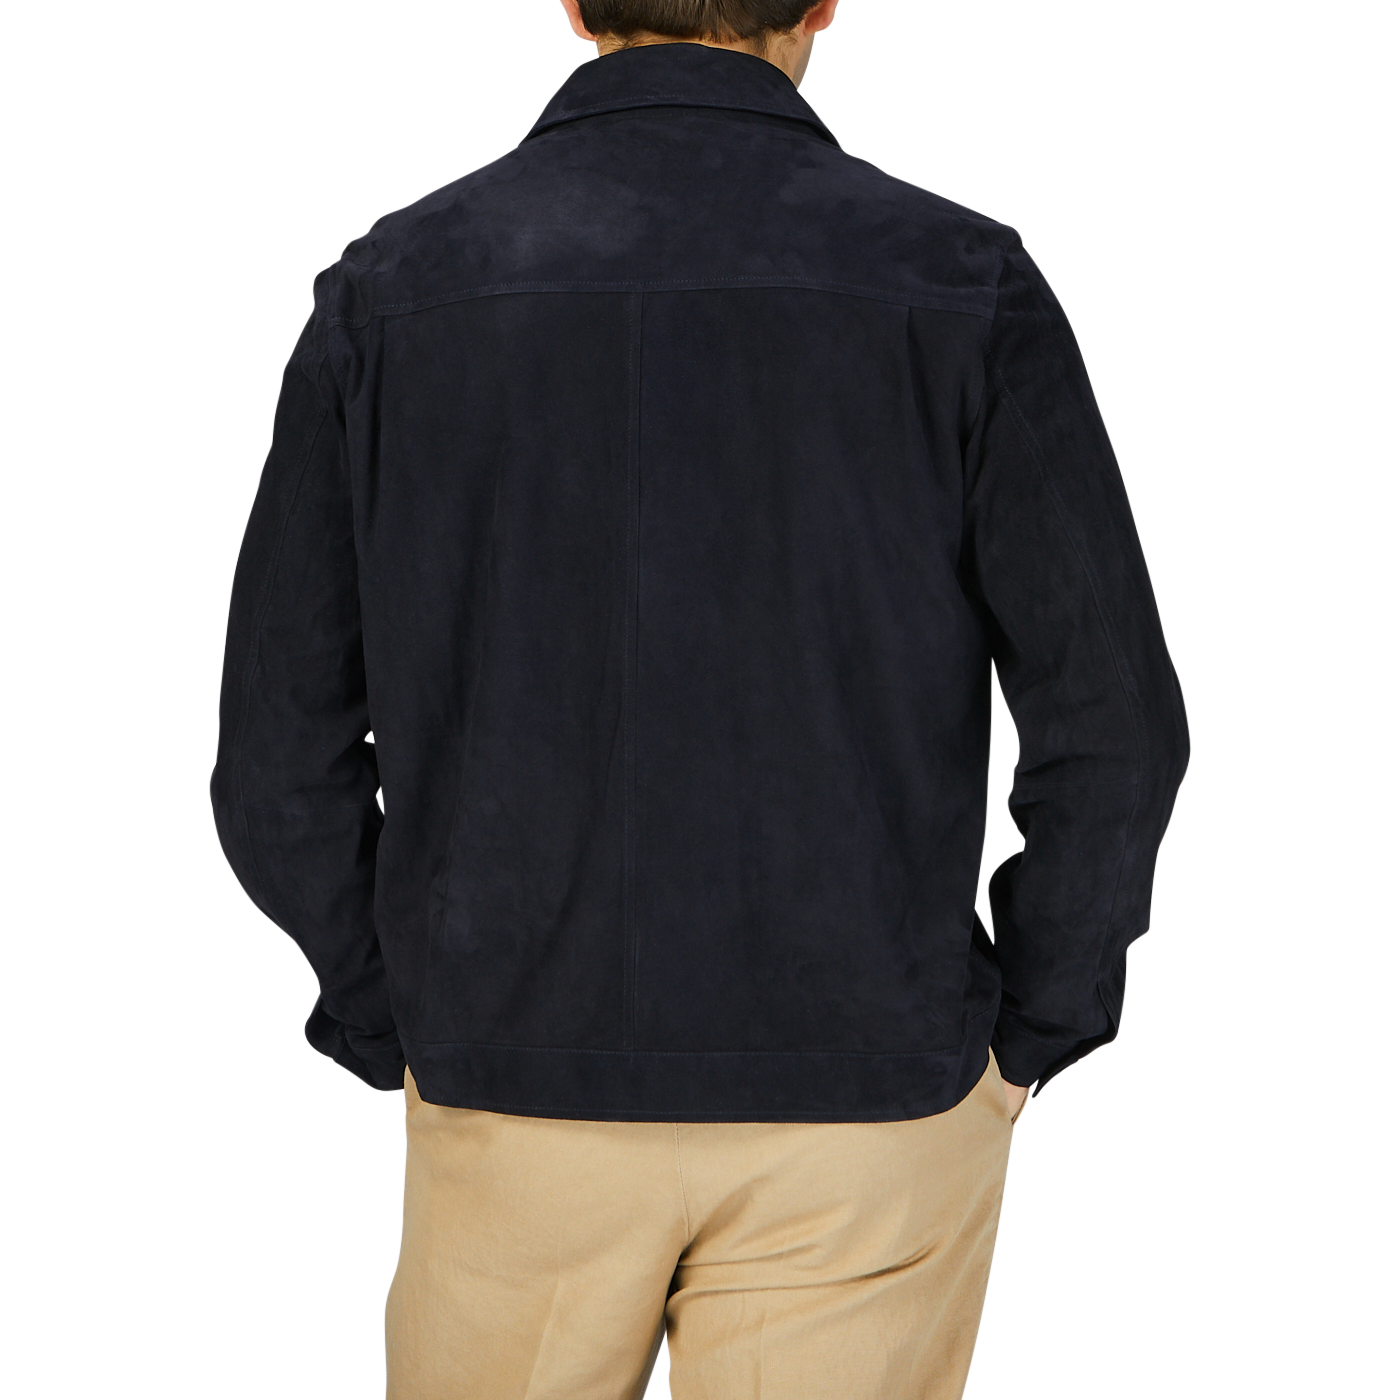 The back view of a man wearing a Manto Navy Blue Suede Leather Overshirt and tan pants.